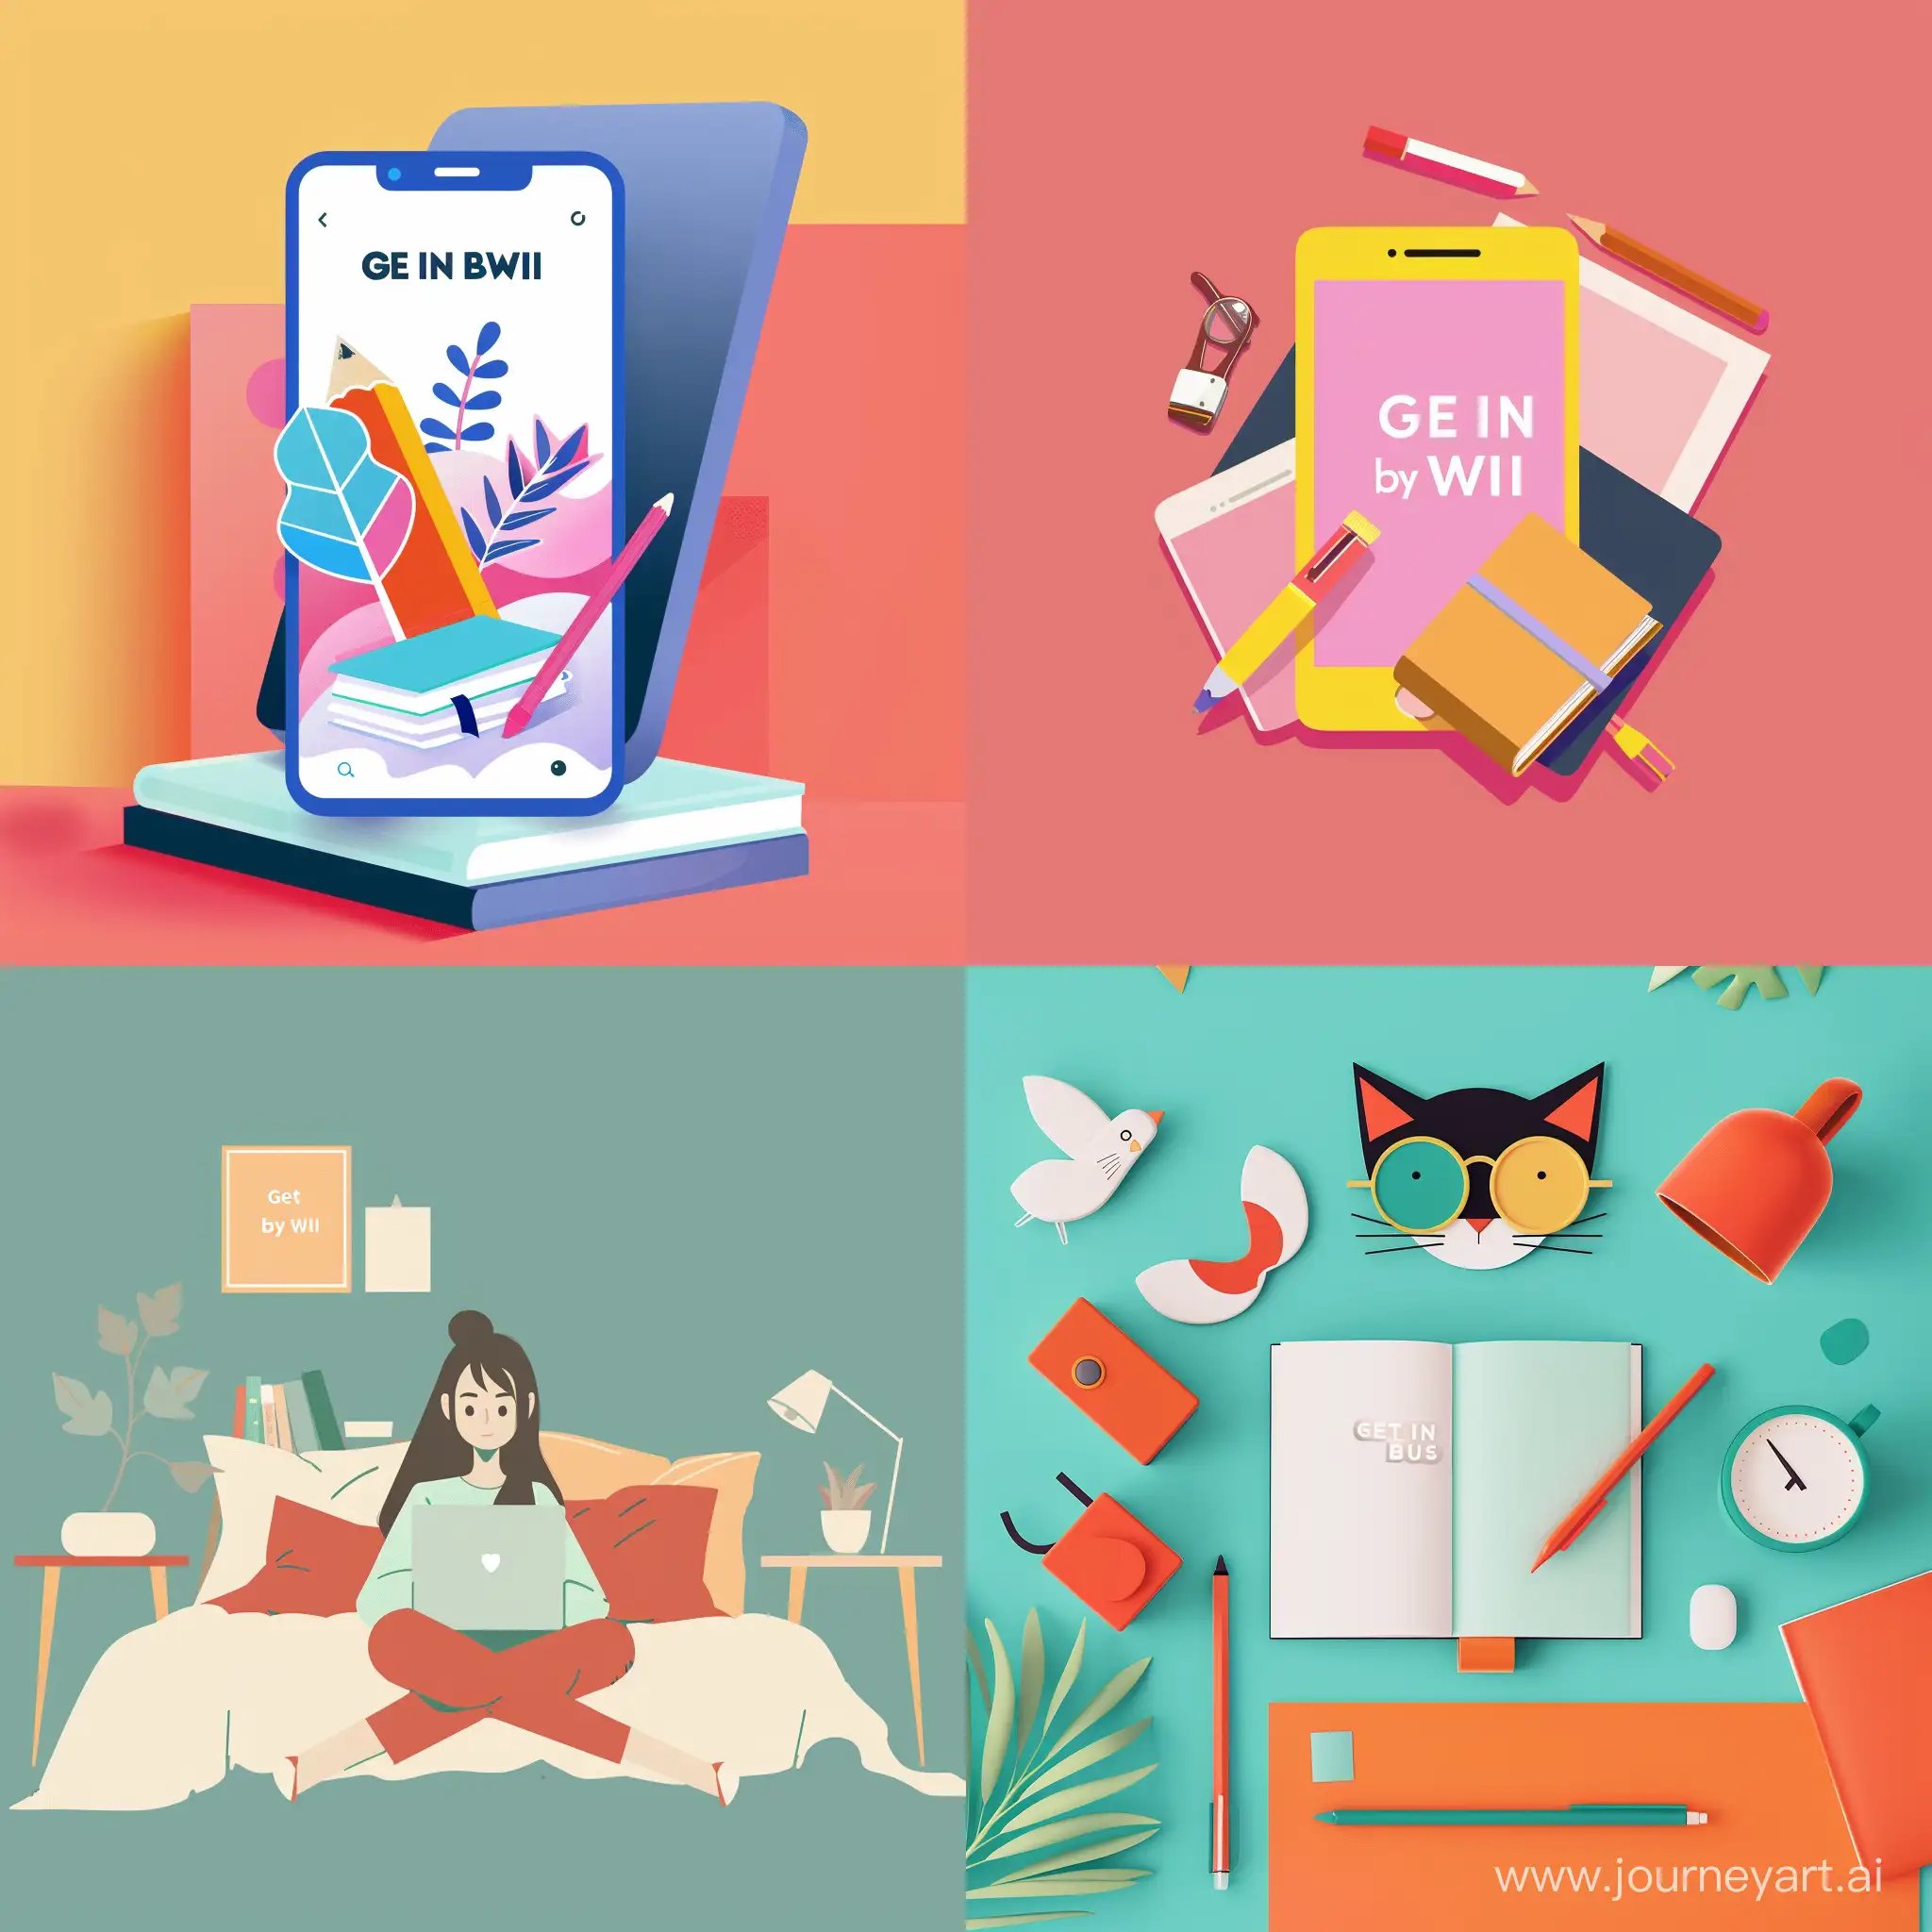 Draw a visual for social media posts for an online USE preparation school called "Get in by lbBWI", in a minimalistic strict yet cute style and bed colors